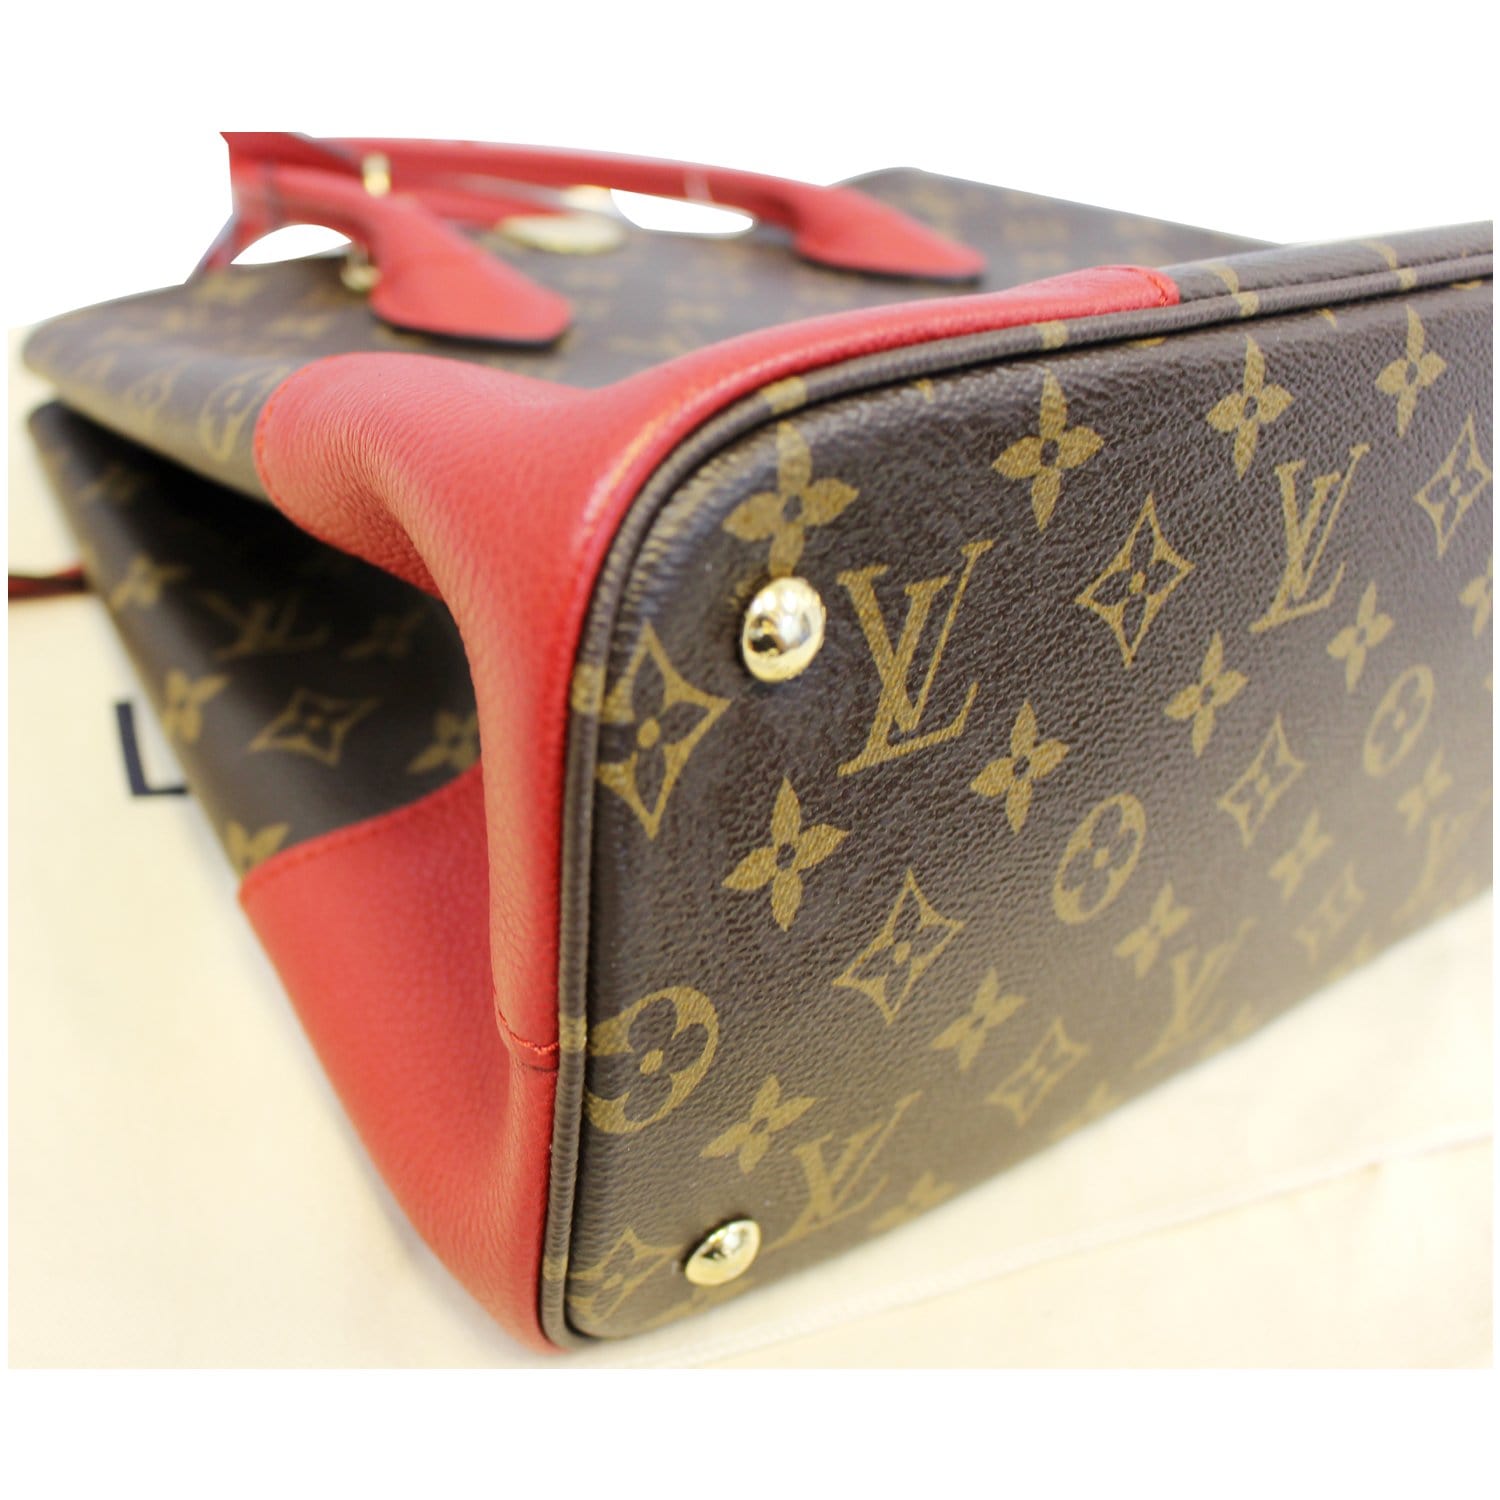 Louis Vuitton Black Monogram Canvas and Leather LV Egg Bag at 1stDibs